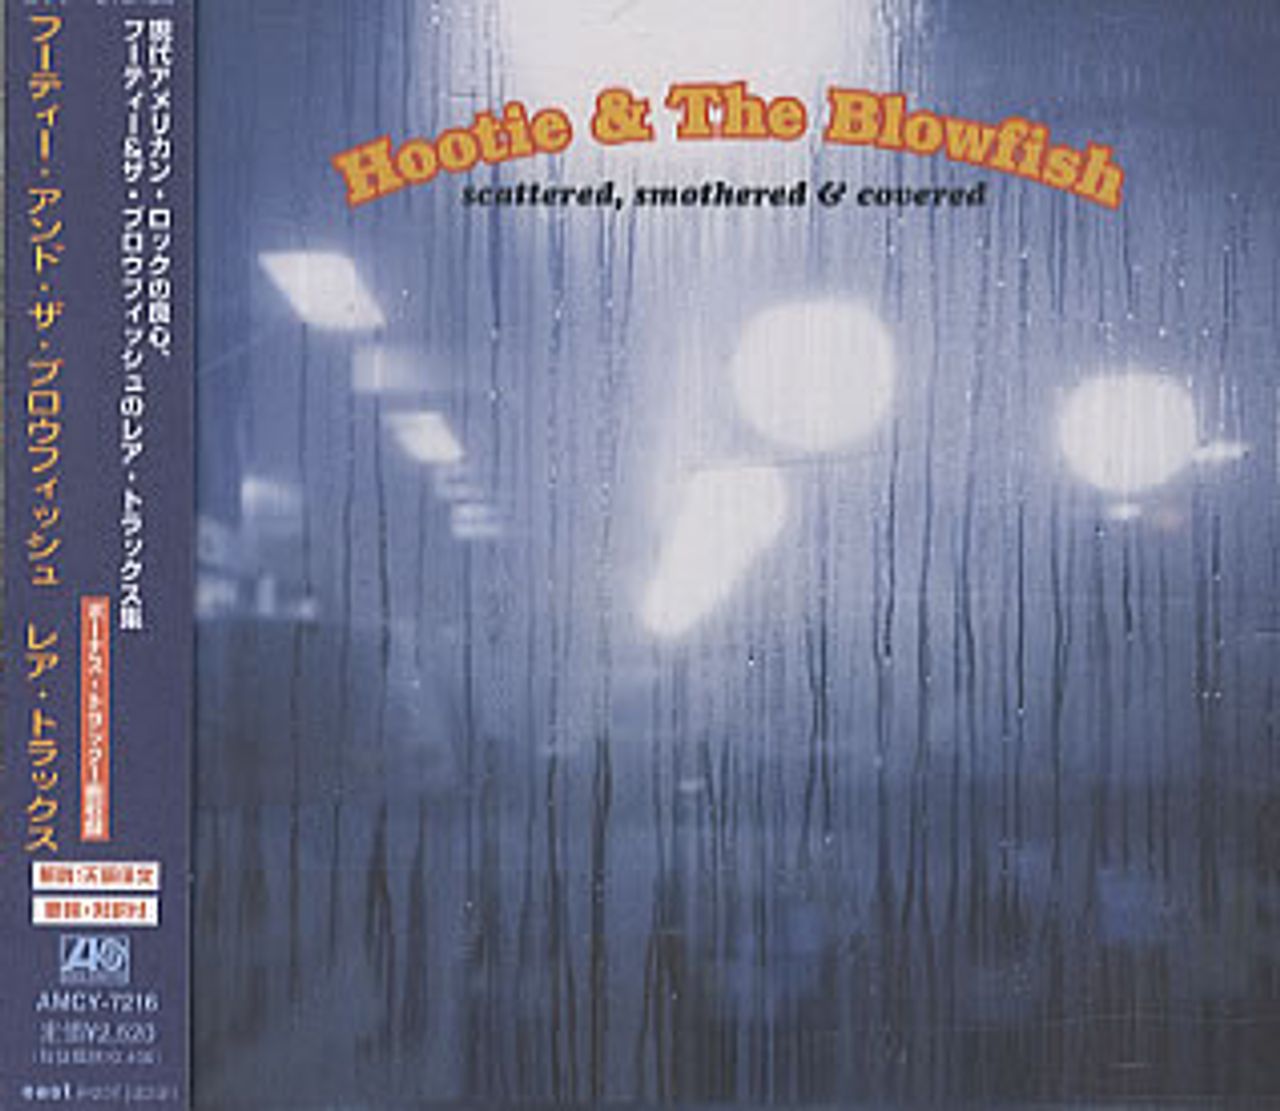 Hootie & The Blowfish Scattered, Smothered & Covered Japanese Promo CD album (CDLP) AMCY-7216